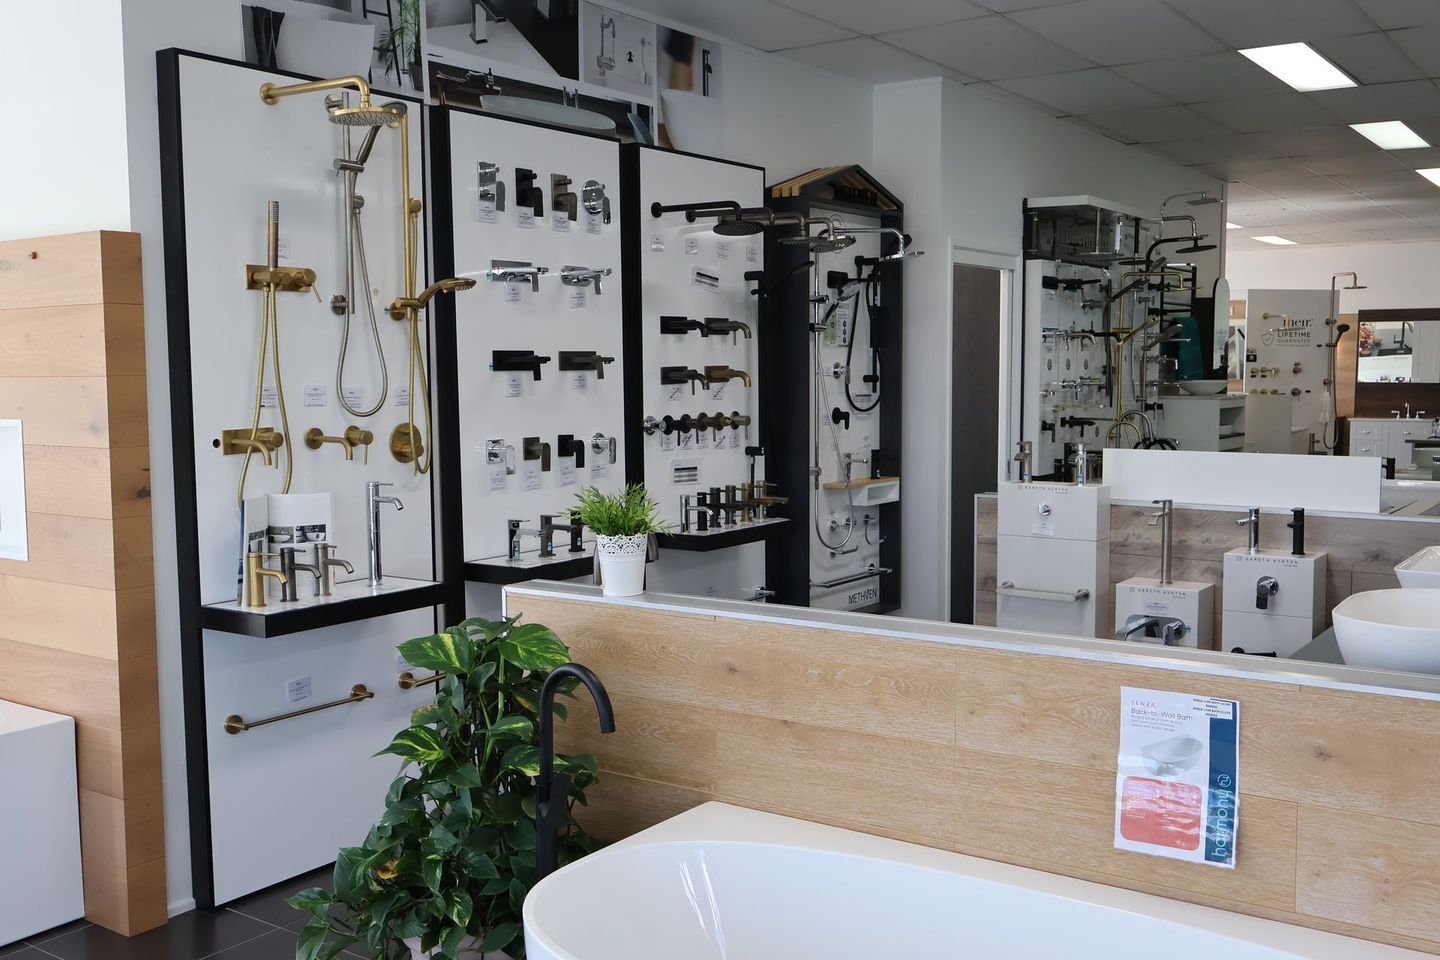 A bathroom showroom filled with lots of faucets and sinks.